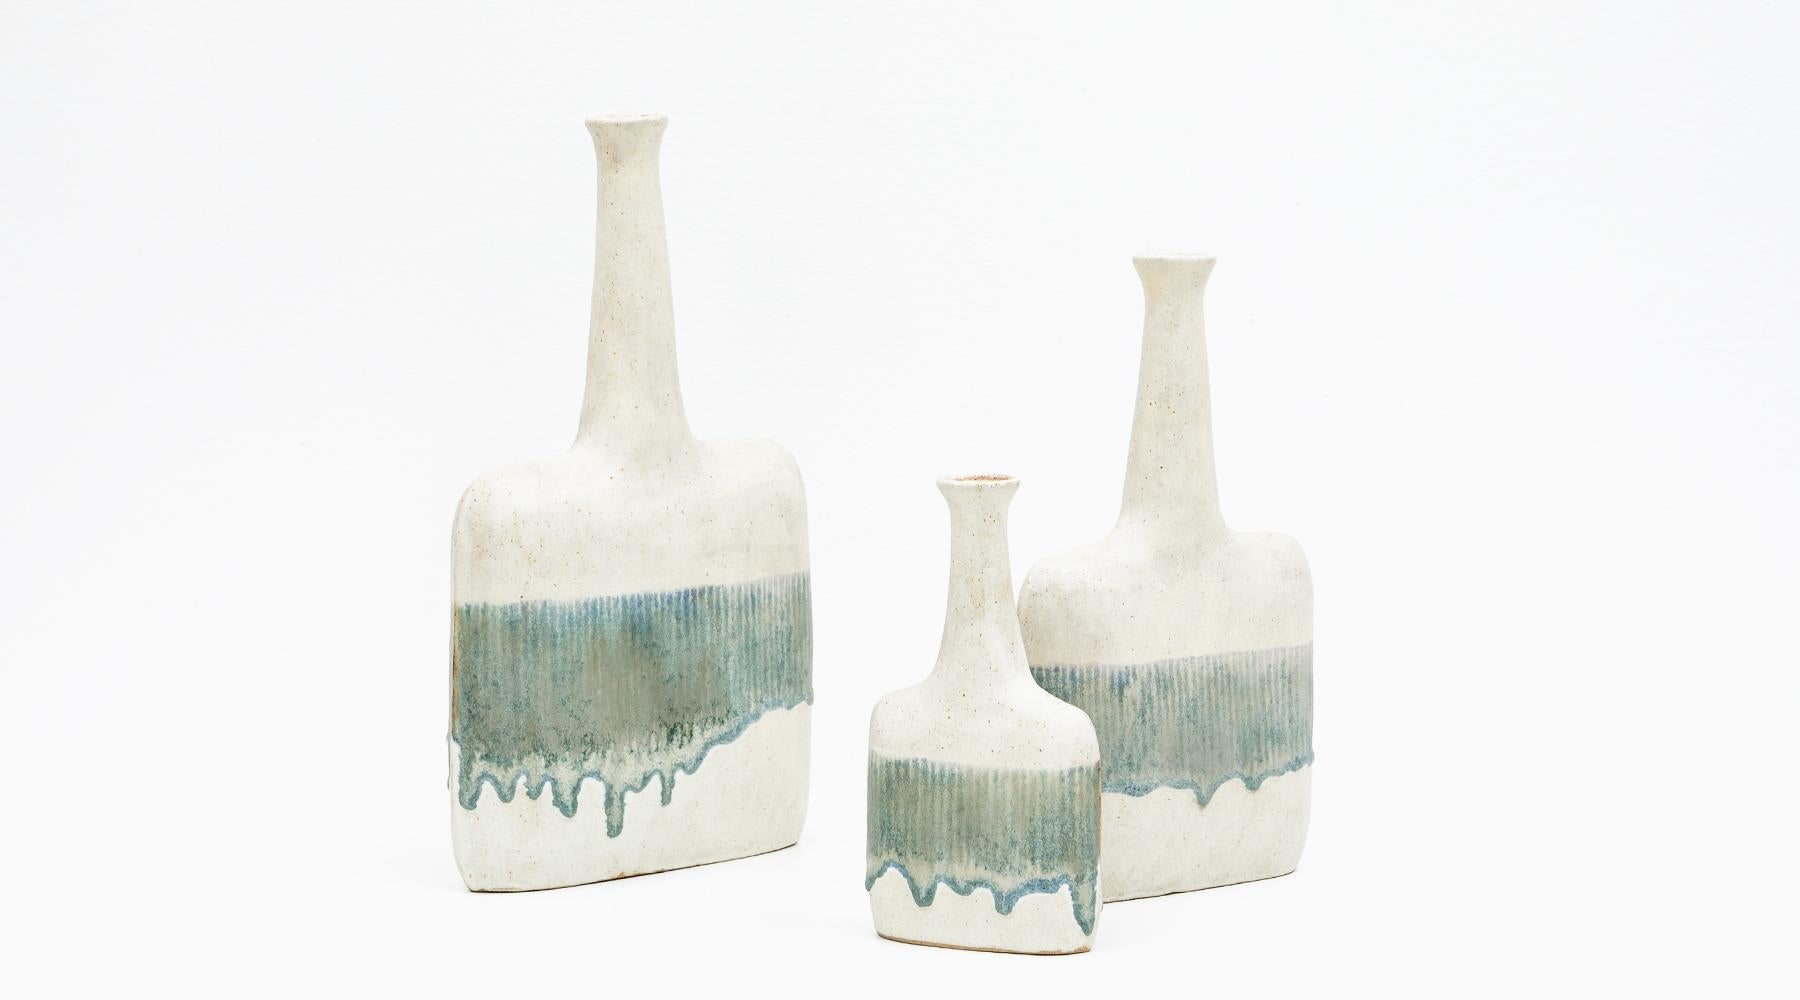 Warm beige and sea tones, set of three vases, ceramic, Bruno Gambone, Italy, 1980s.

Lovely set of ceramic objects by the versatile artist Bruno Gambone from the 1980s. They vary in height and width. Each vase has a long narrow neck in contrast to